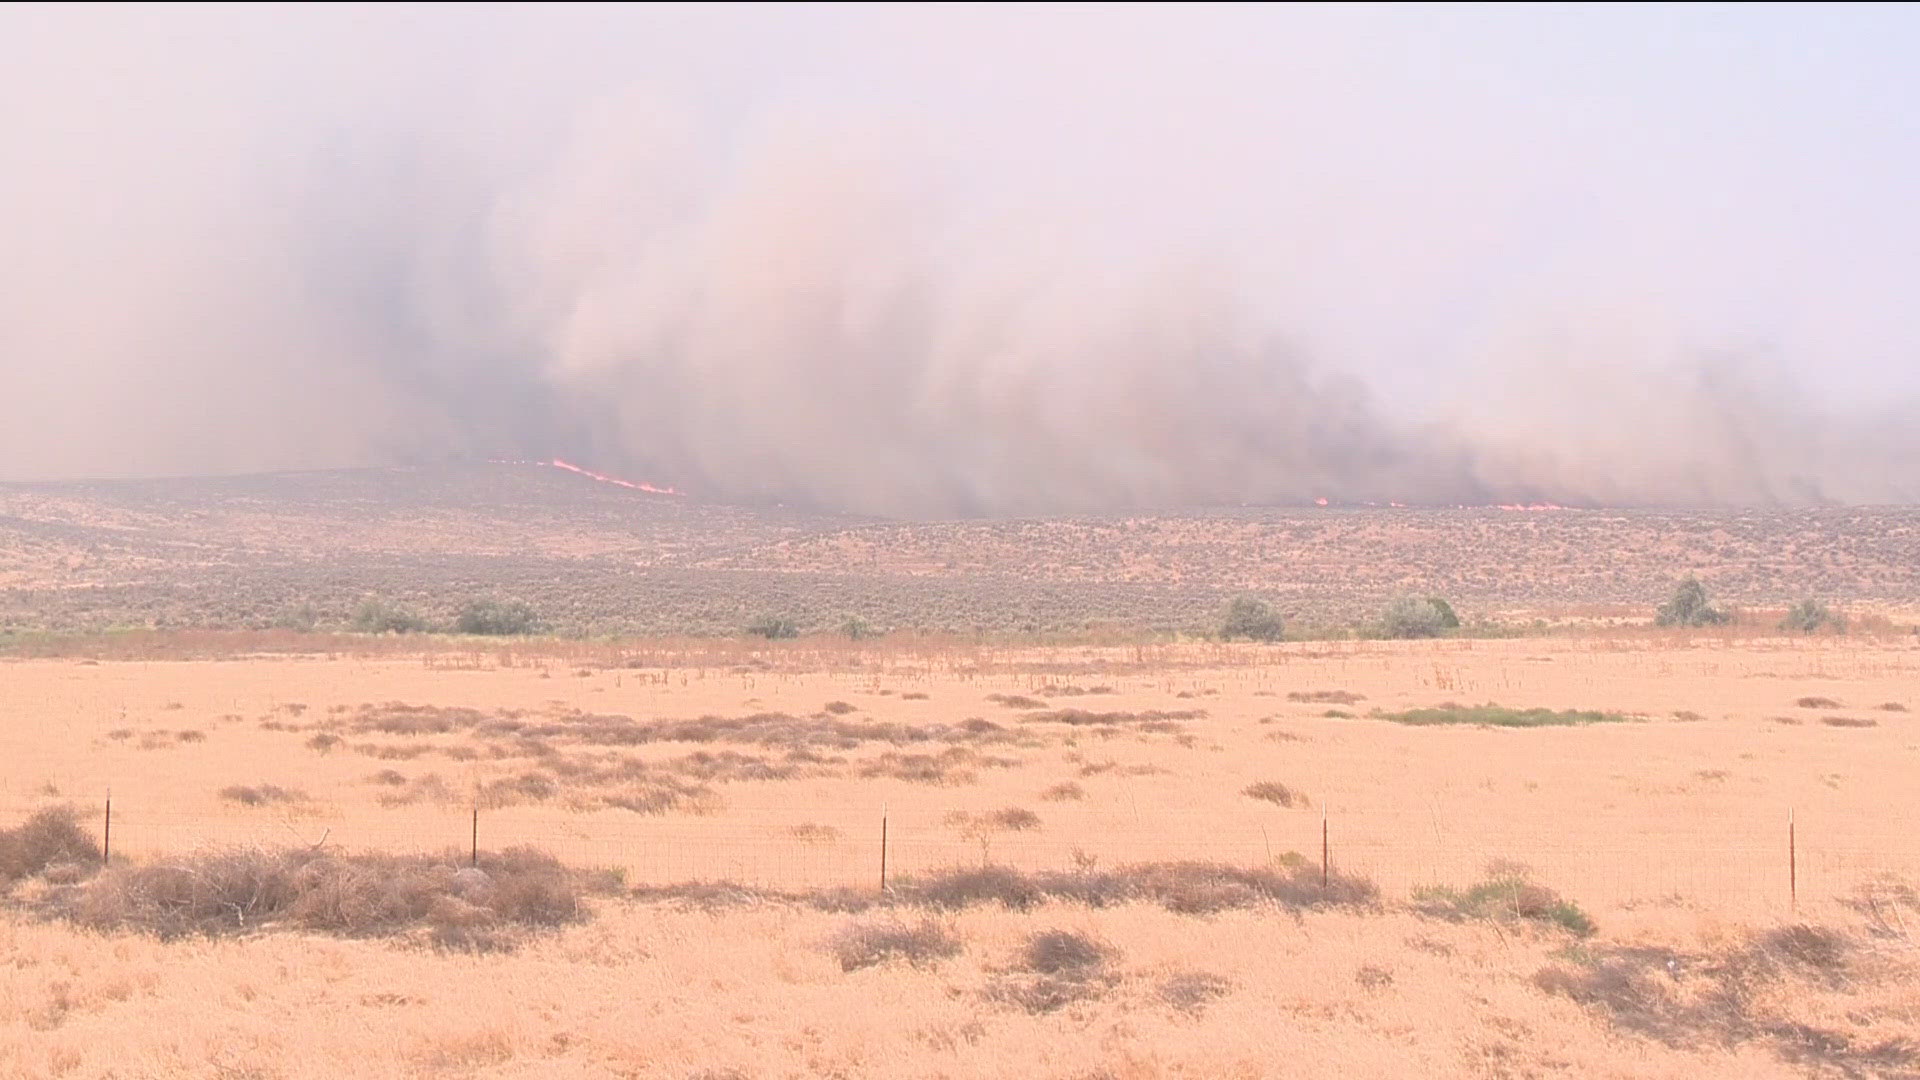 Smoke continues rolling in from wildfires in Eastern Oregon, including the Durkee Fire.